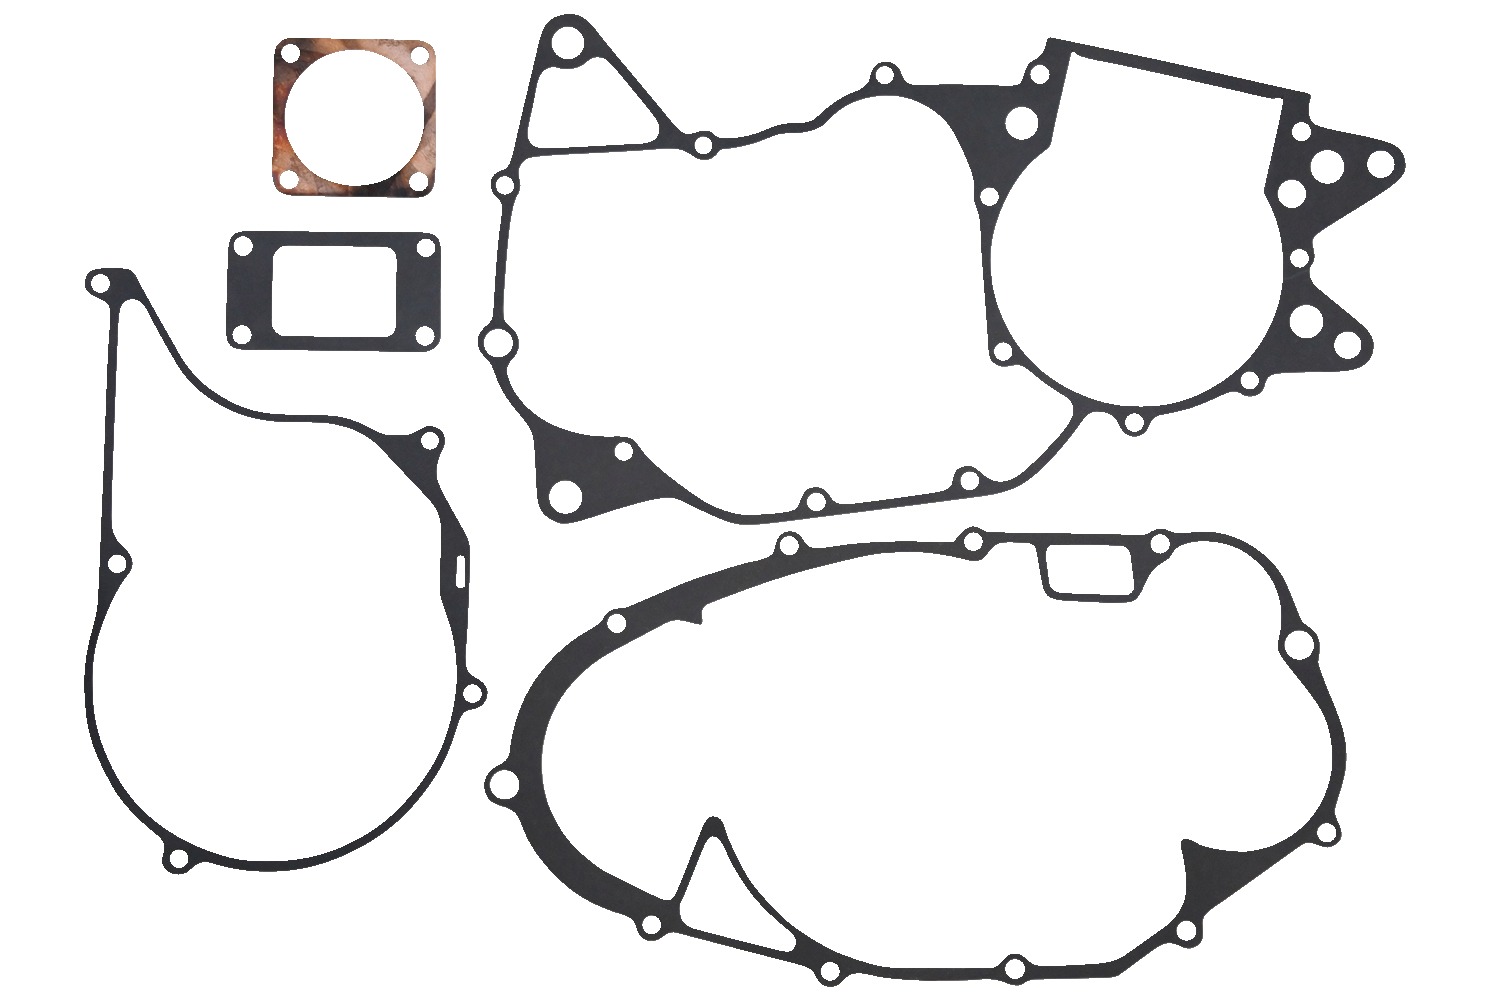 Lower Engine Gasket Kit - For 73-74 Honda CR250 - Click Image to Close